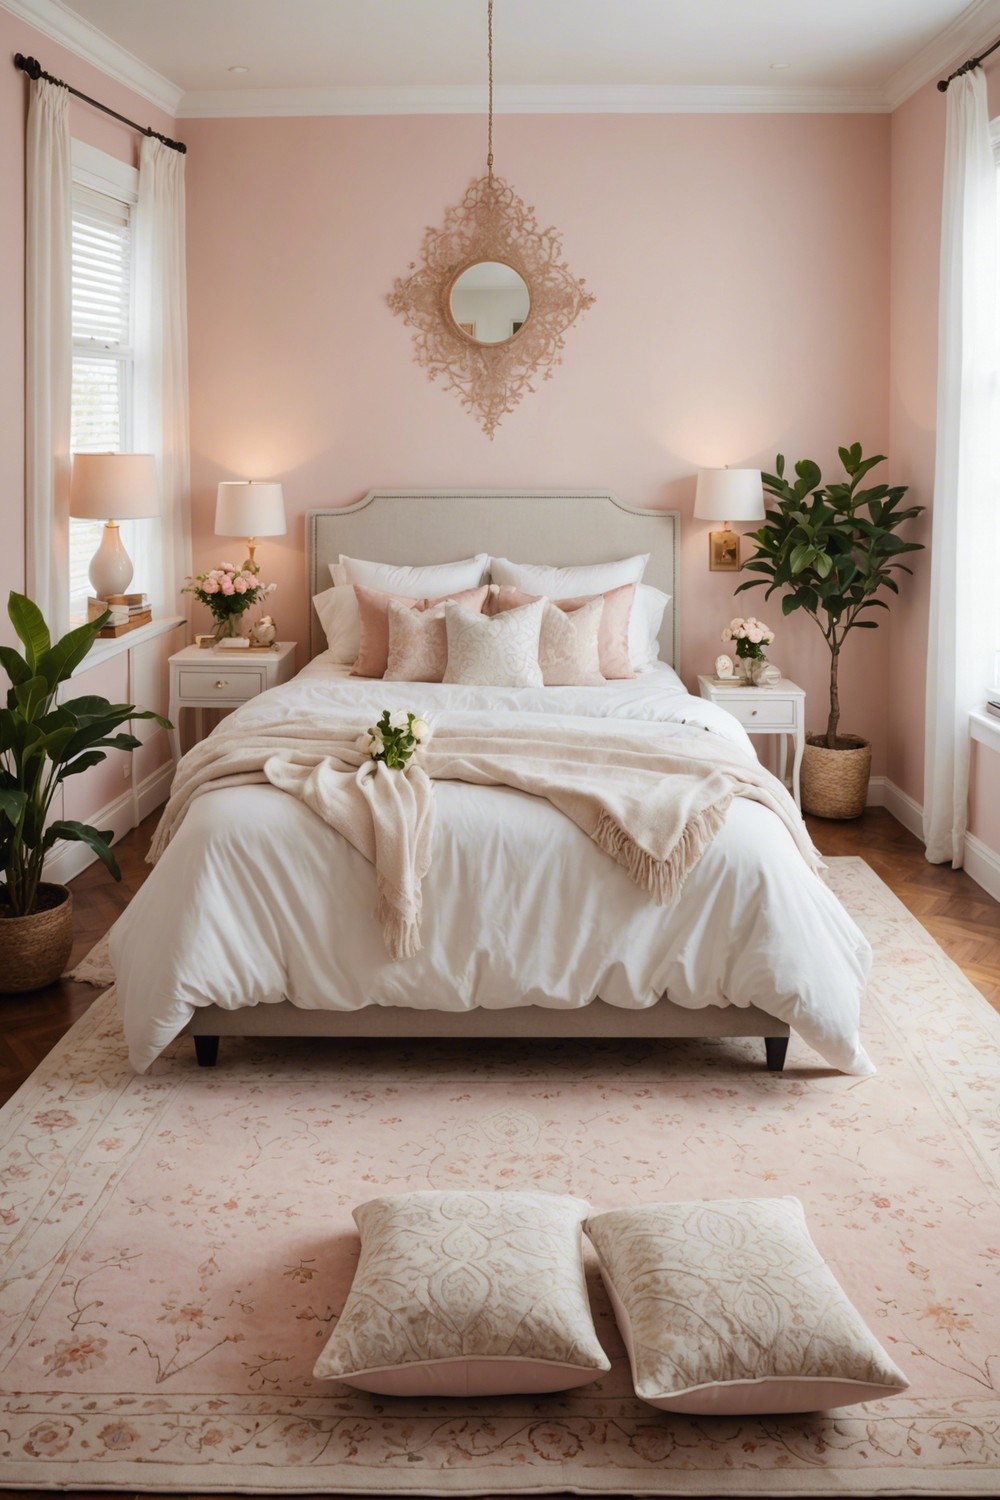 Dreamy Sanctuary: Soft Pinks and Whites with Floral Accents